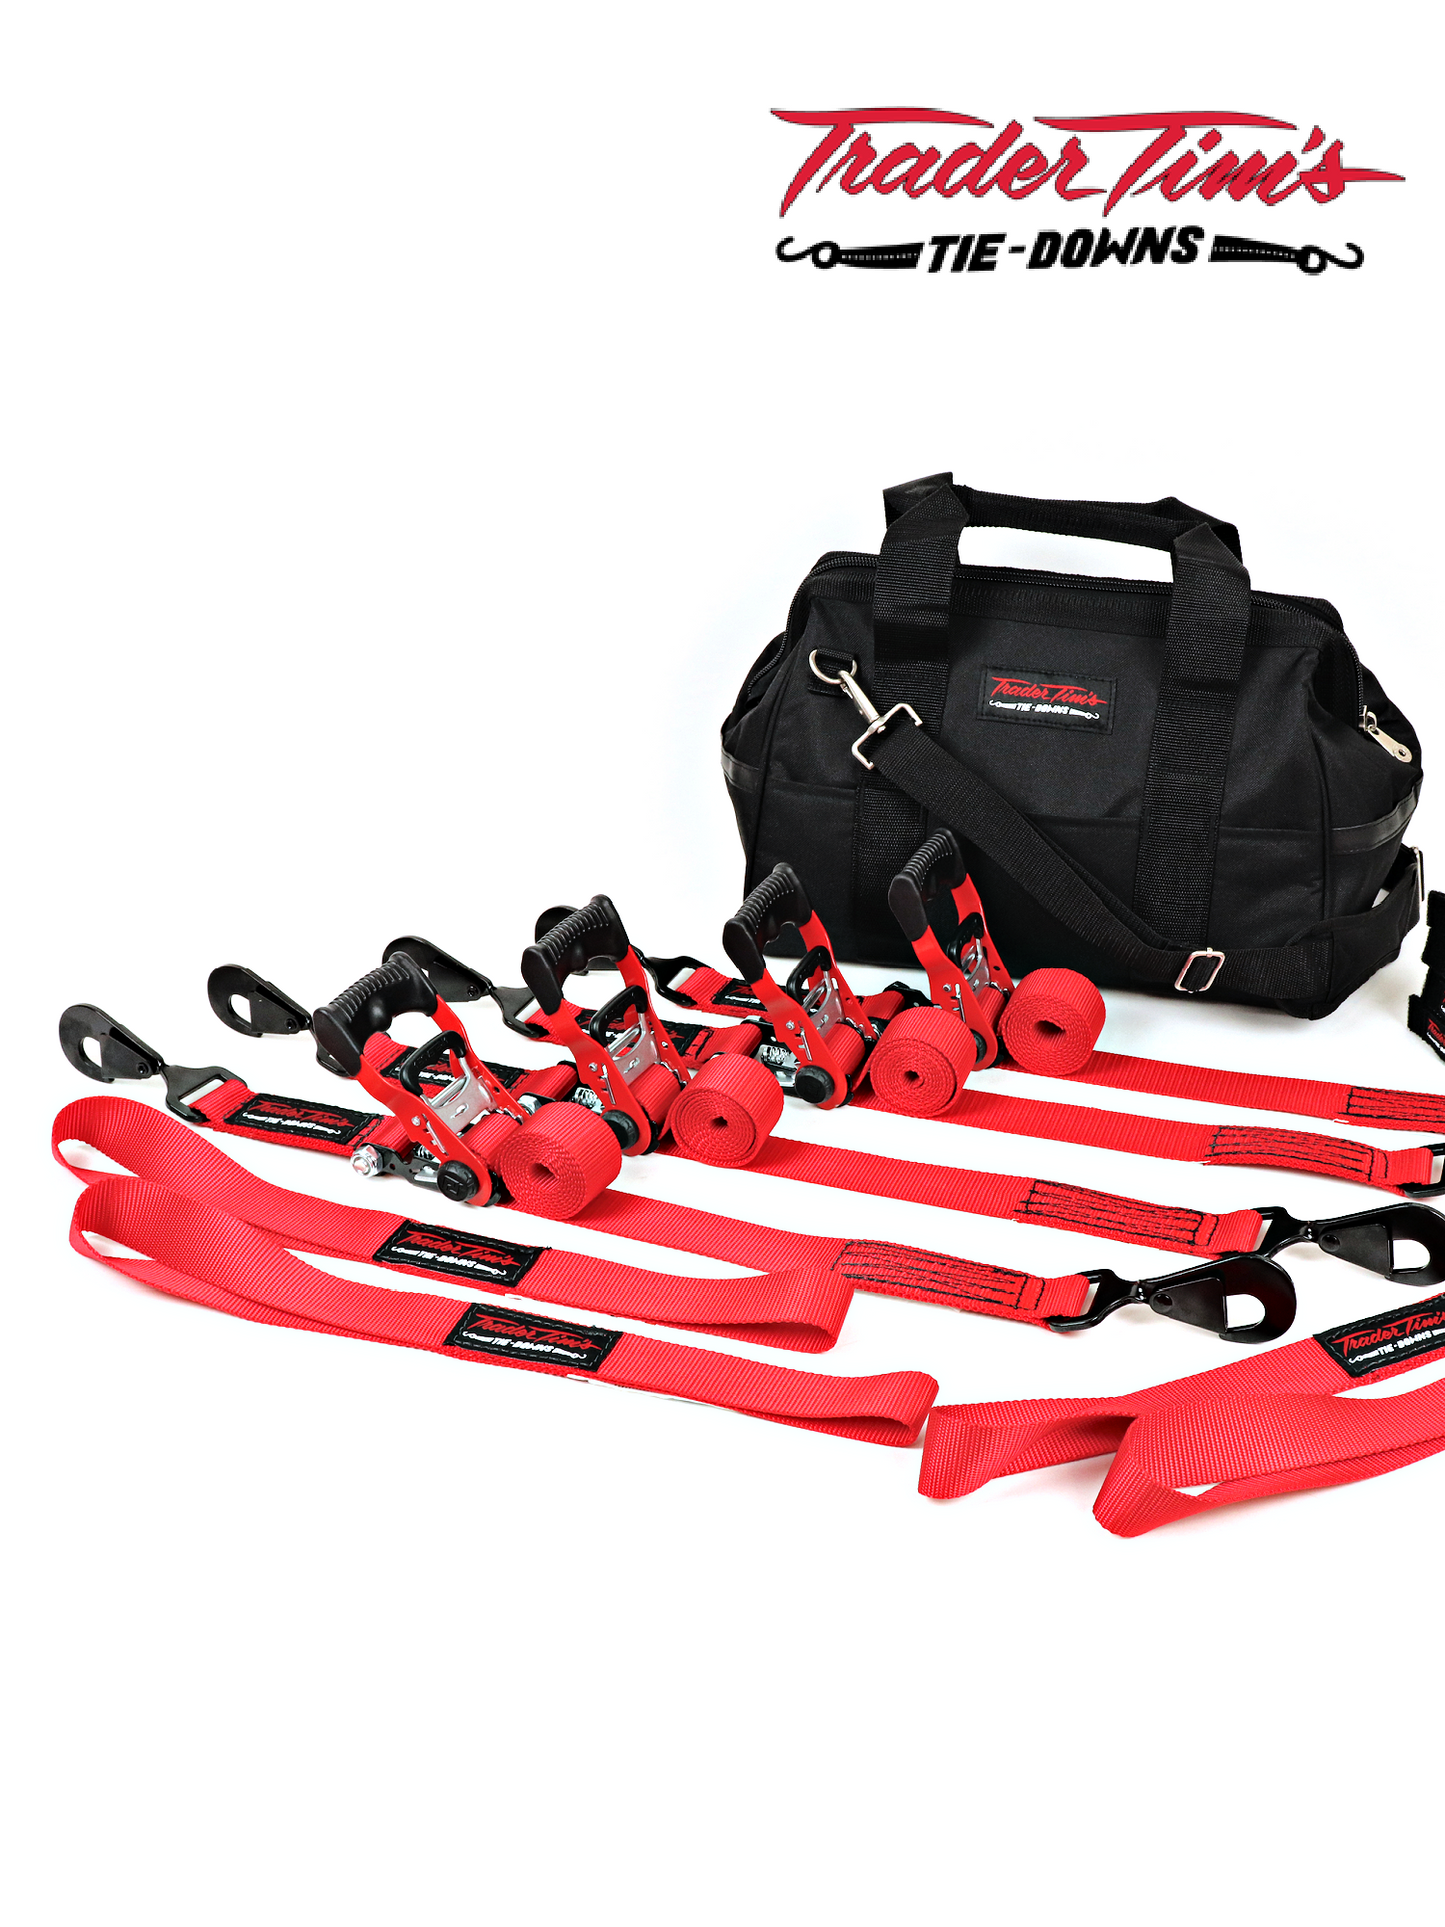 13 Piece 1.5" Ratchet & Extension Tie-Down Kit - Red or Black